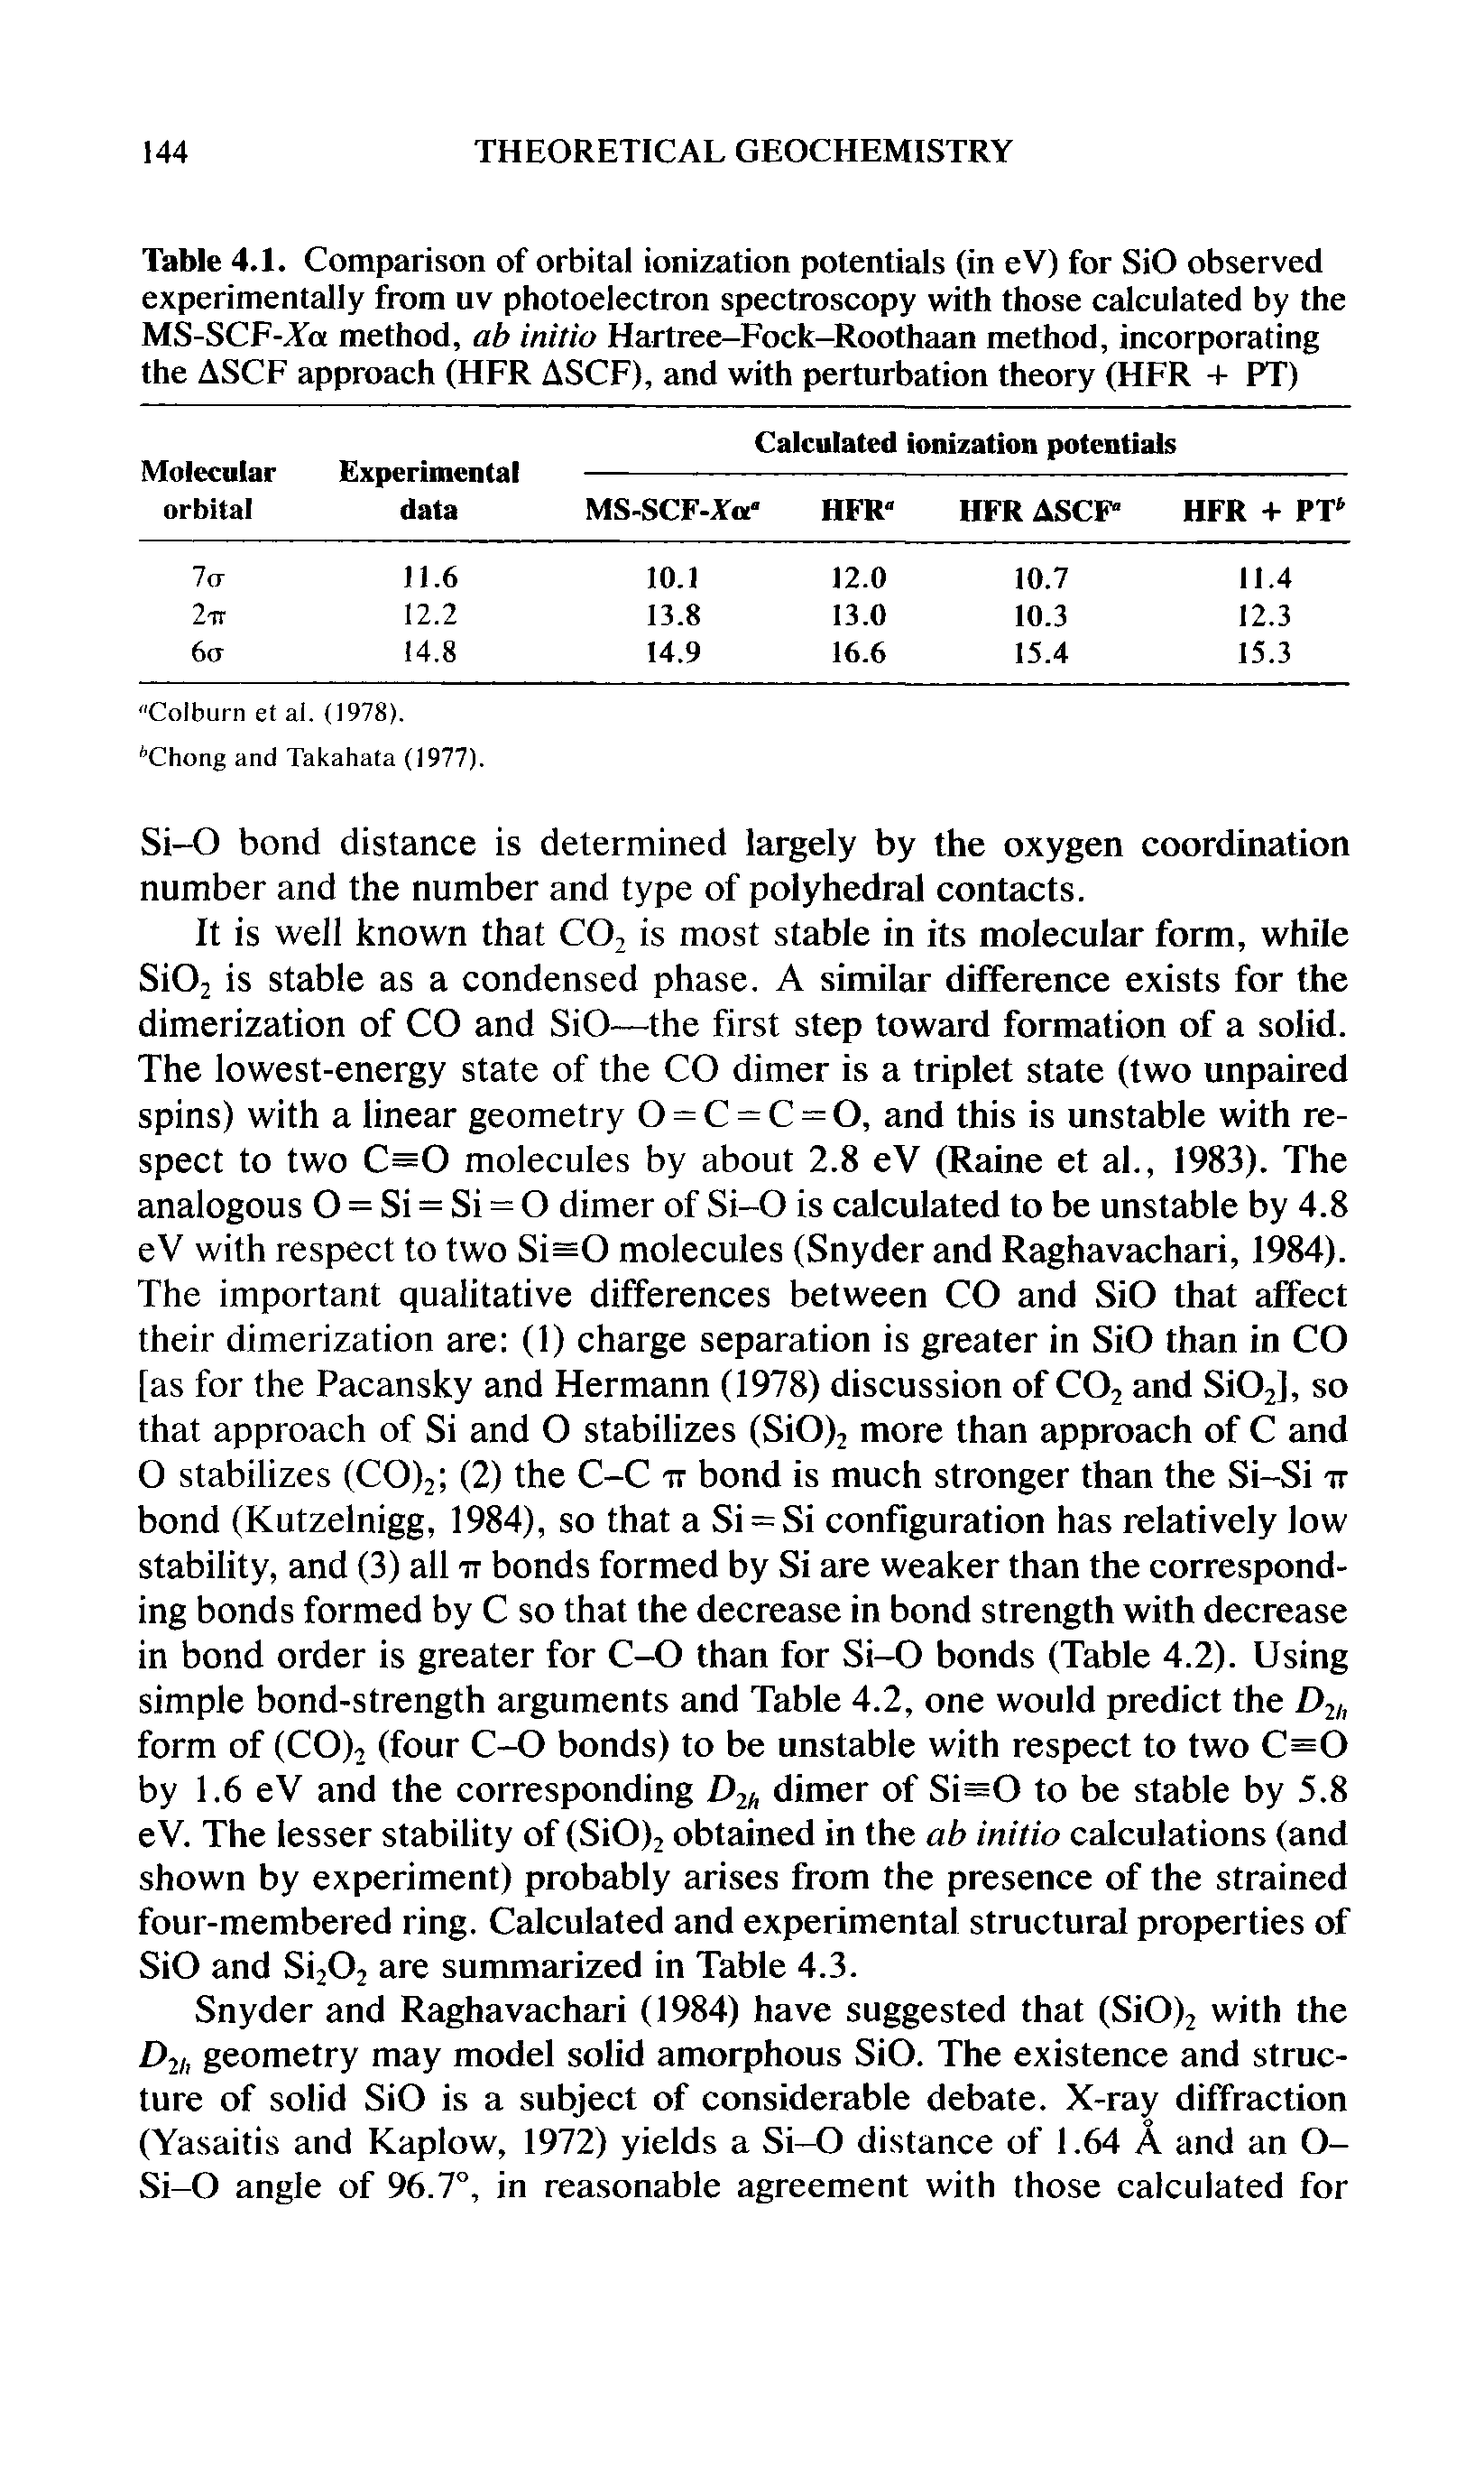 Table 4.1. Comparison of orbital ionization potentials (in eV) for SiO observed experimentally from uv photoelectron spectroscopy with those calculated by the MS-SCF-Ya method, ab initio Hartree-Fock-Roothaan method, incorporating the ASCF approach (HFR ASCF), and with perturbation theory (HFR + PT)...